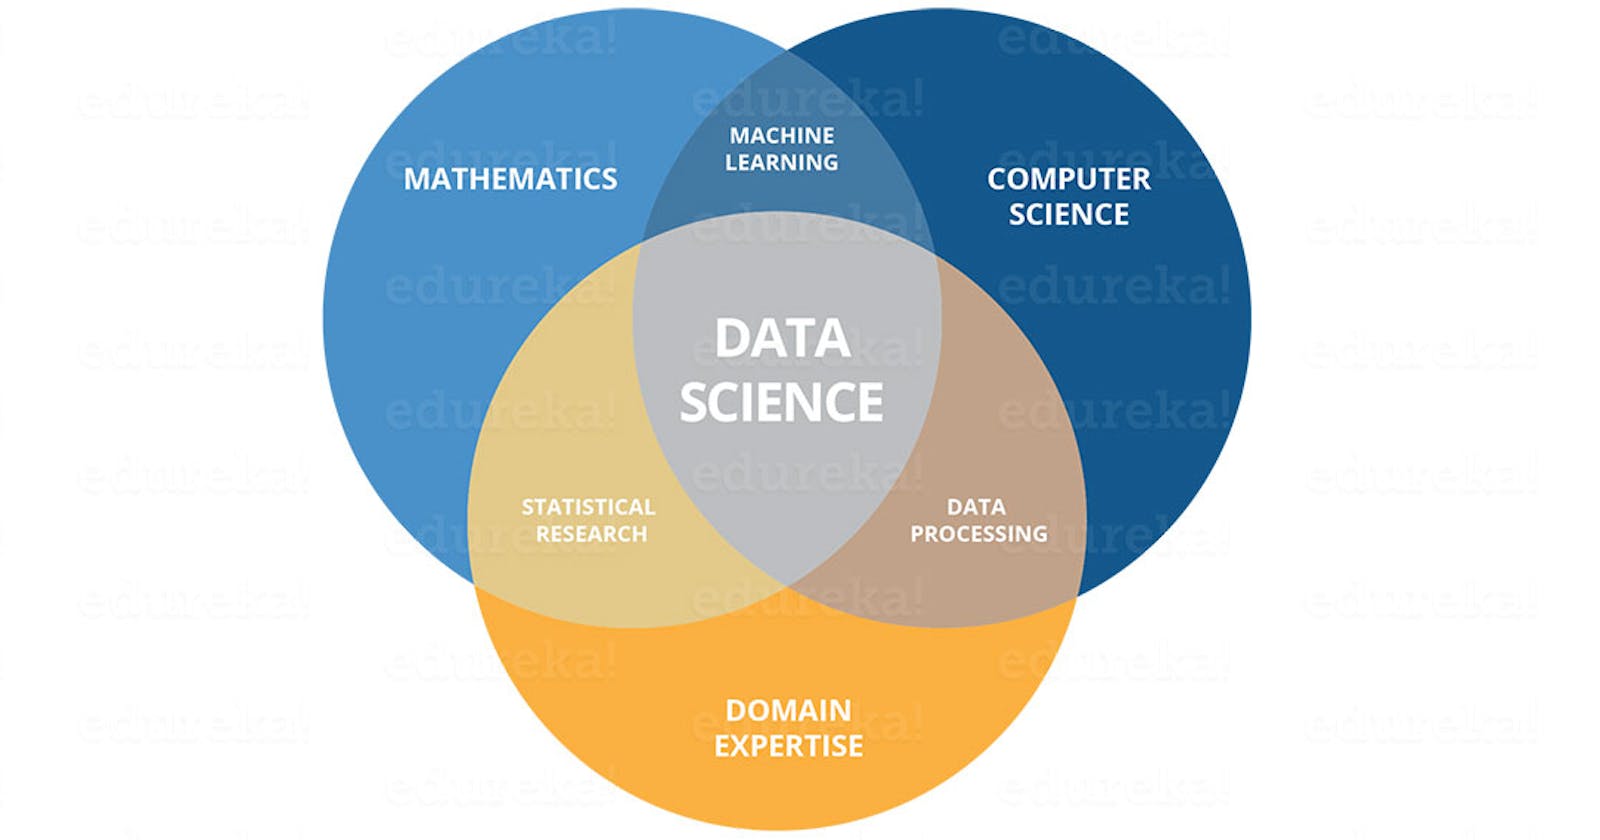 WHAT IS DATA SCIENCE?